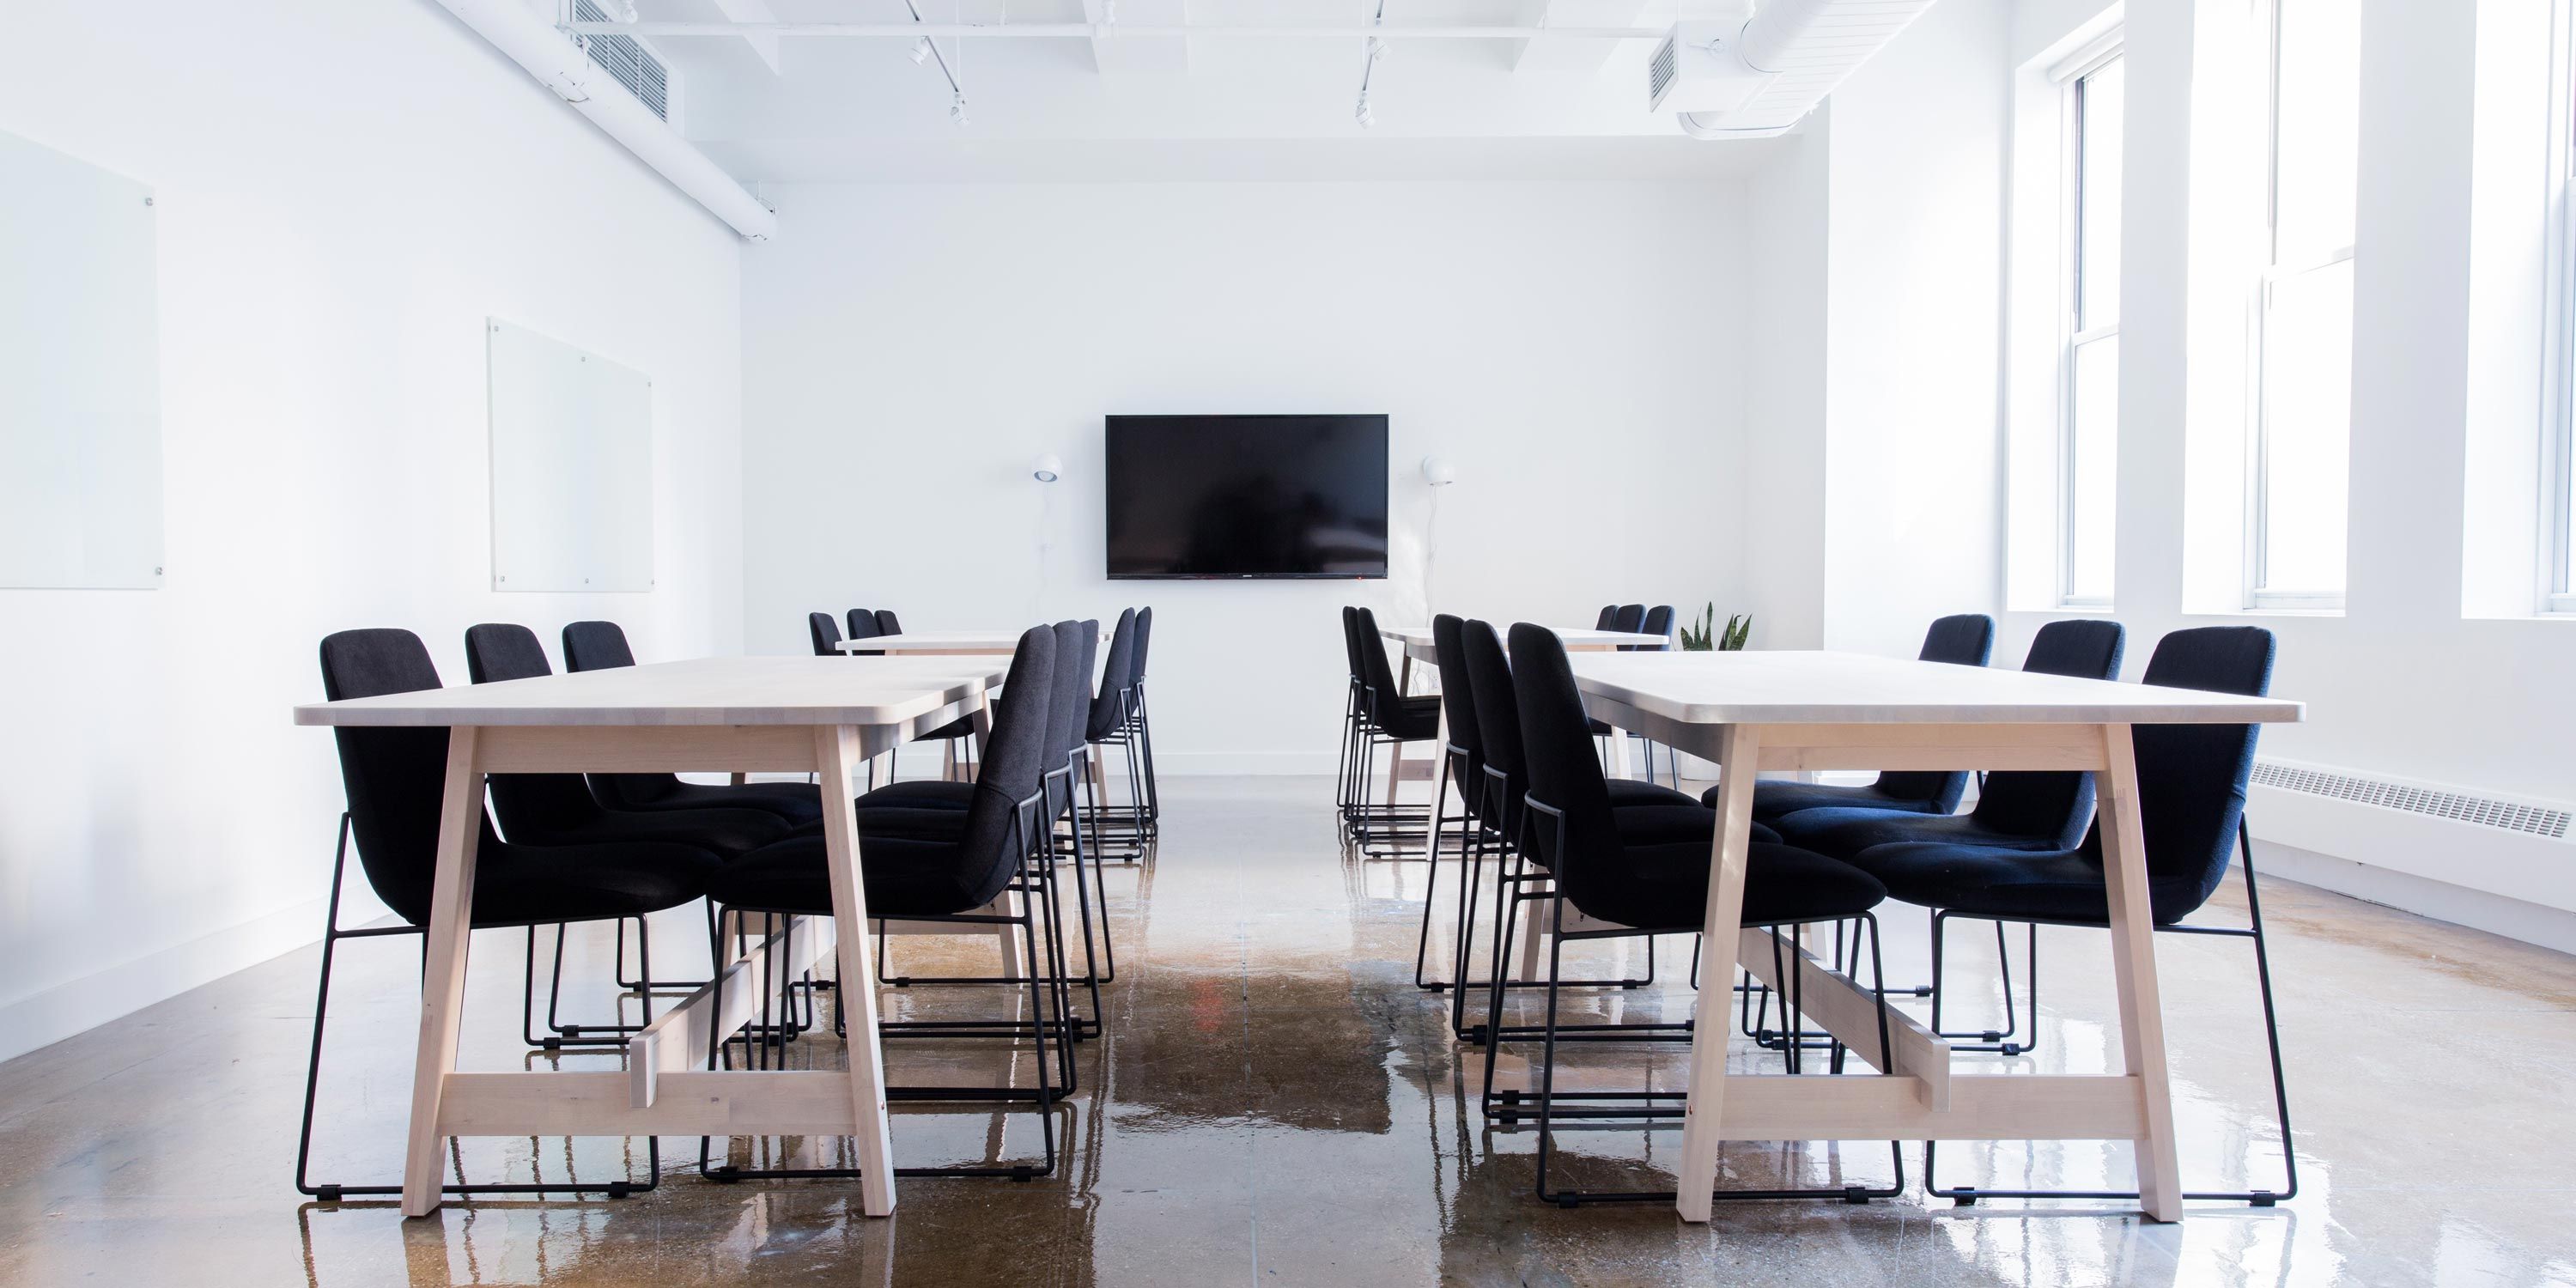 huddle room, smart home technology, black chairs at wooden tables